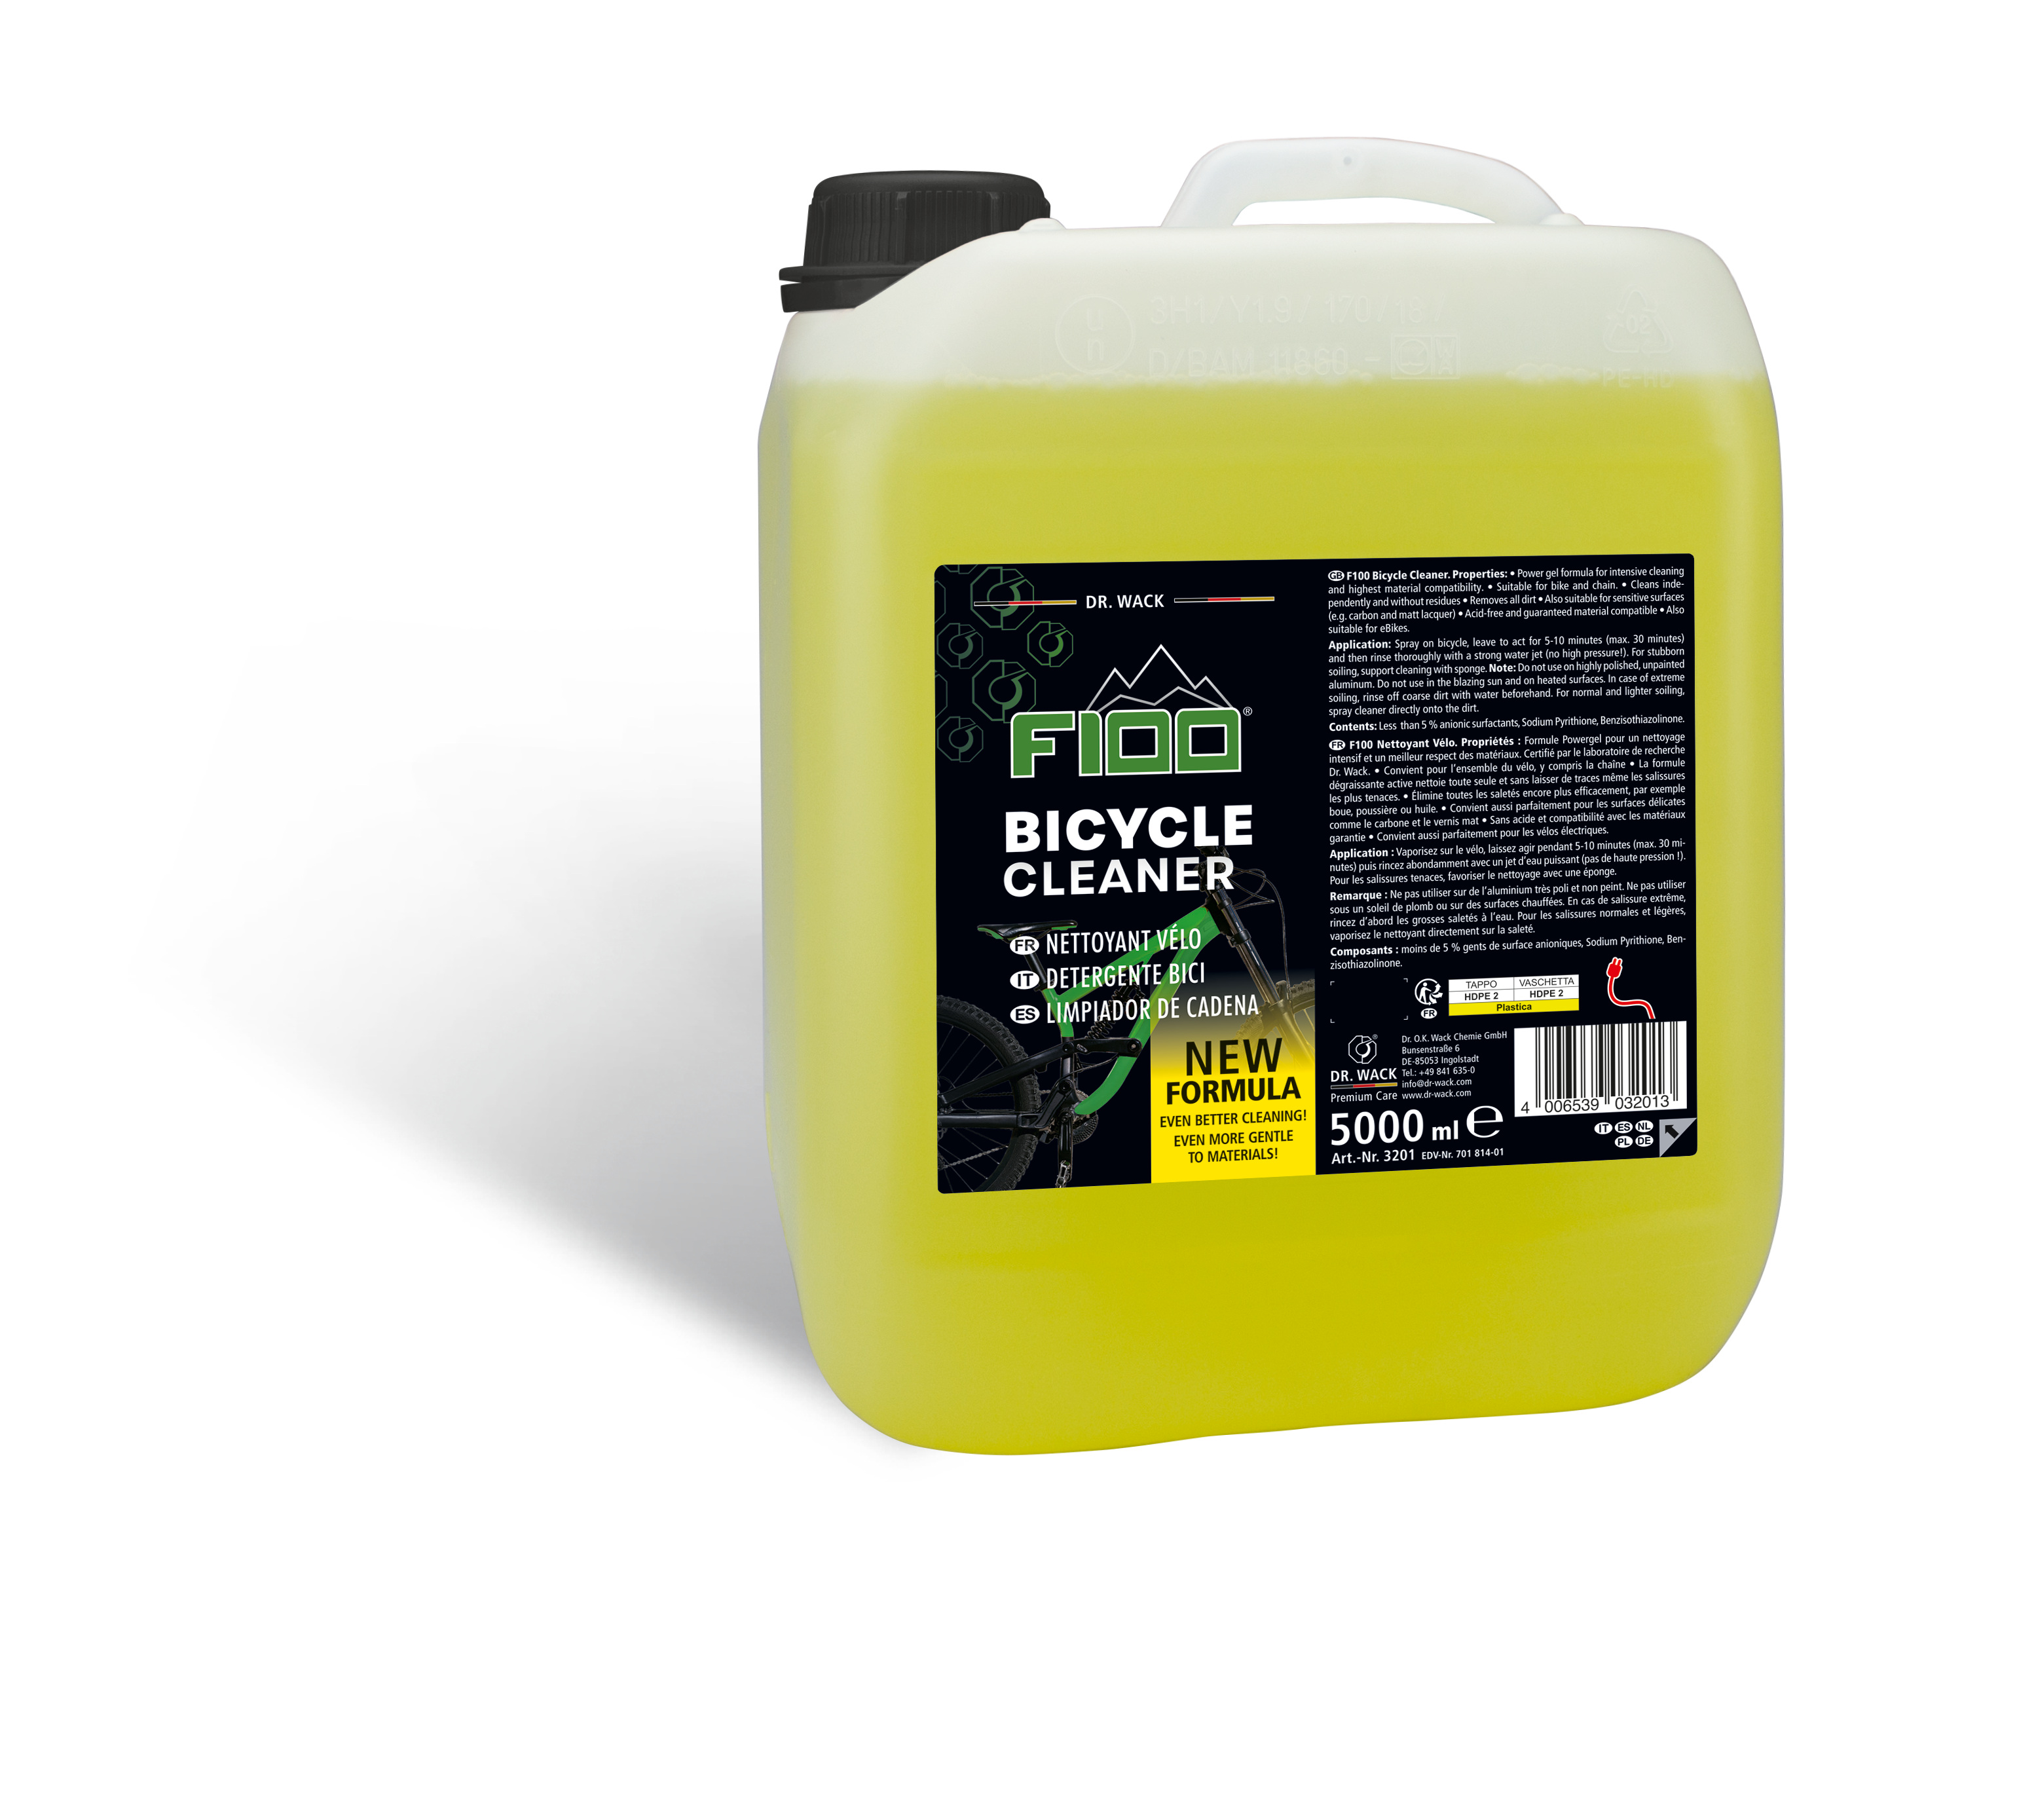 F100 Bicycle Cleaner